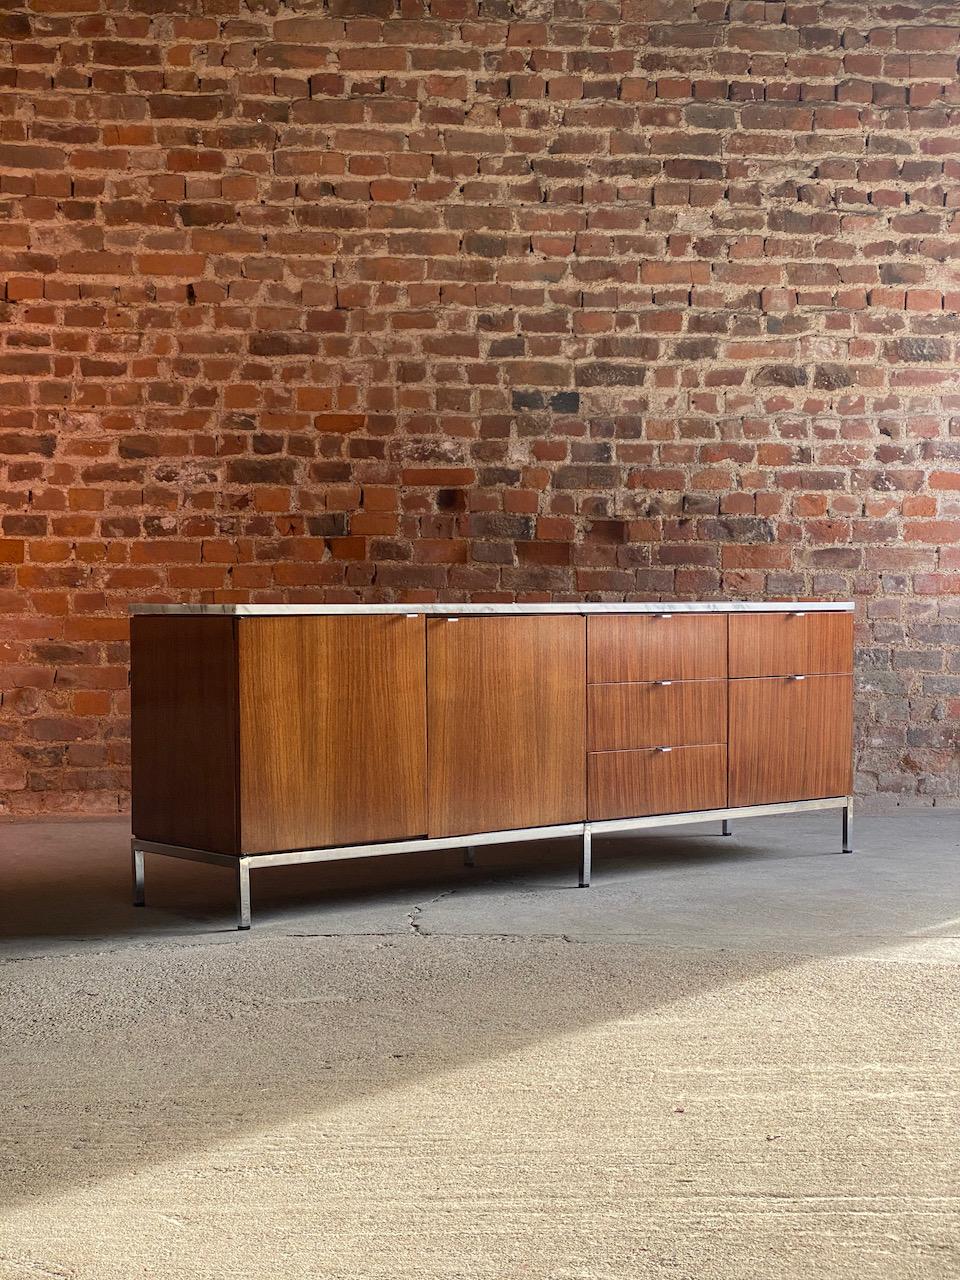 Florence Knoll marble & rosewood credenza USA 1950s

Magnificent Mid-Century Modern Florence Knoll rosewood and marble credenza for Knoll International, USA circa 1950s, original marble topped rosewood credenza, produced under license by